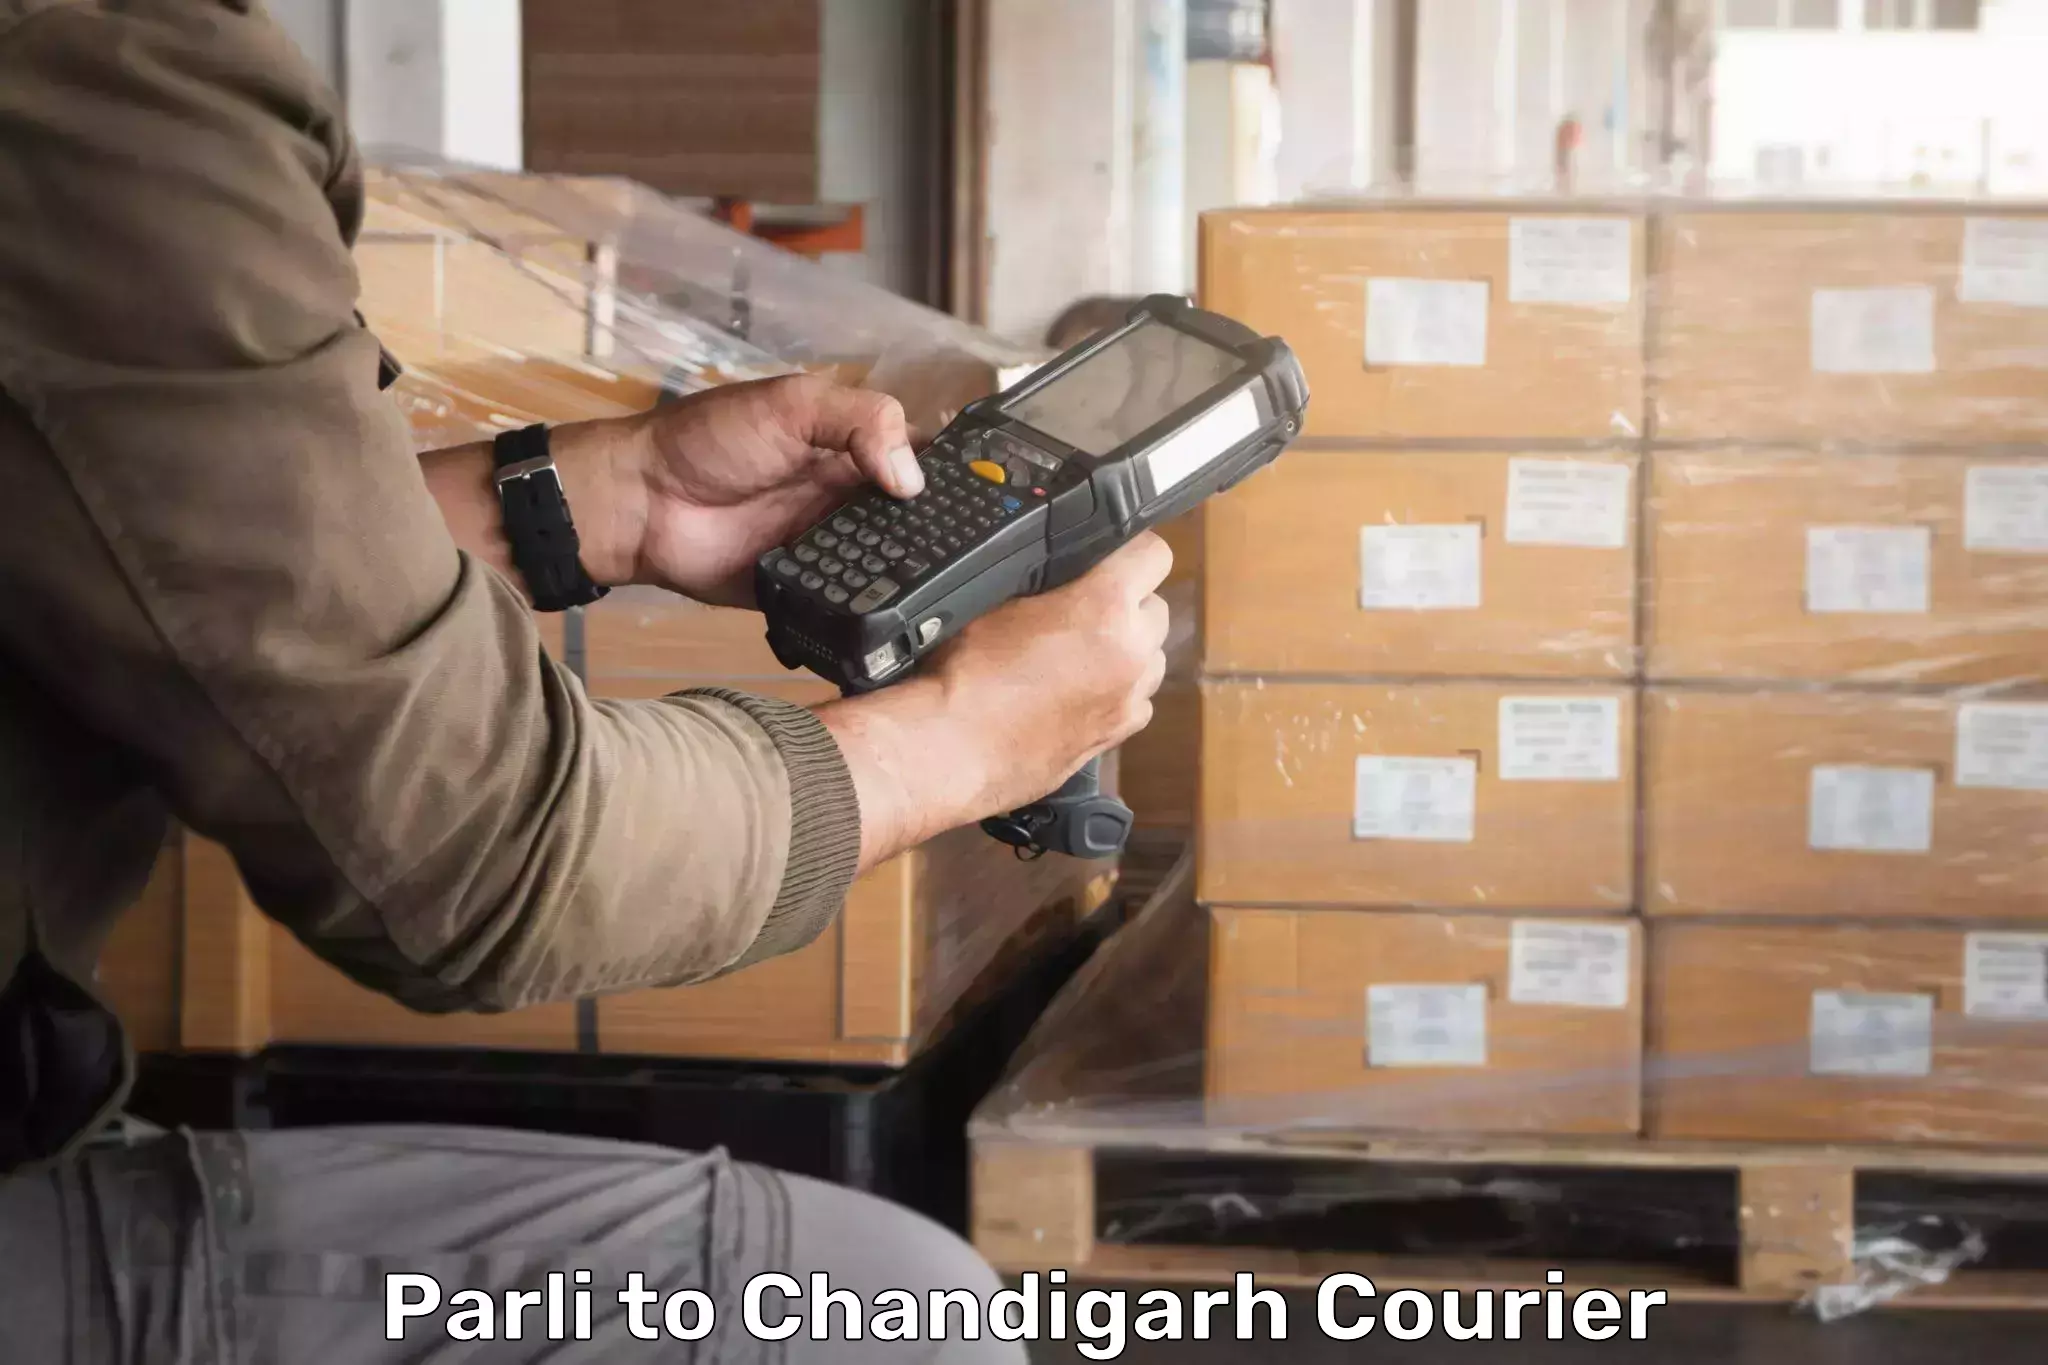 Next day courier Parli to Chandigarh